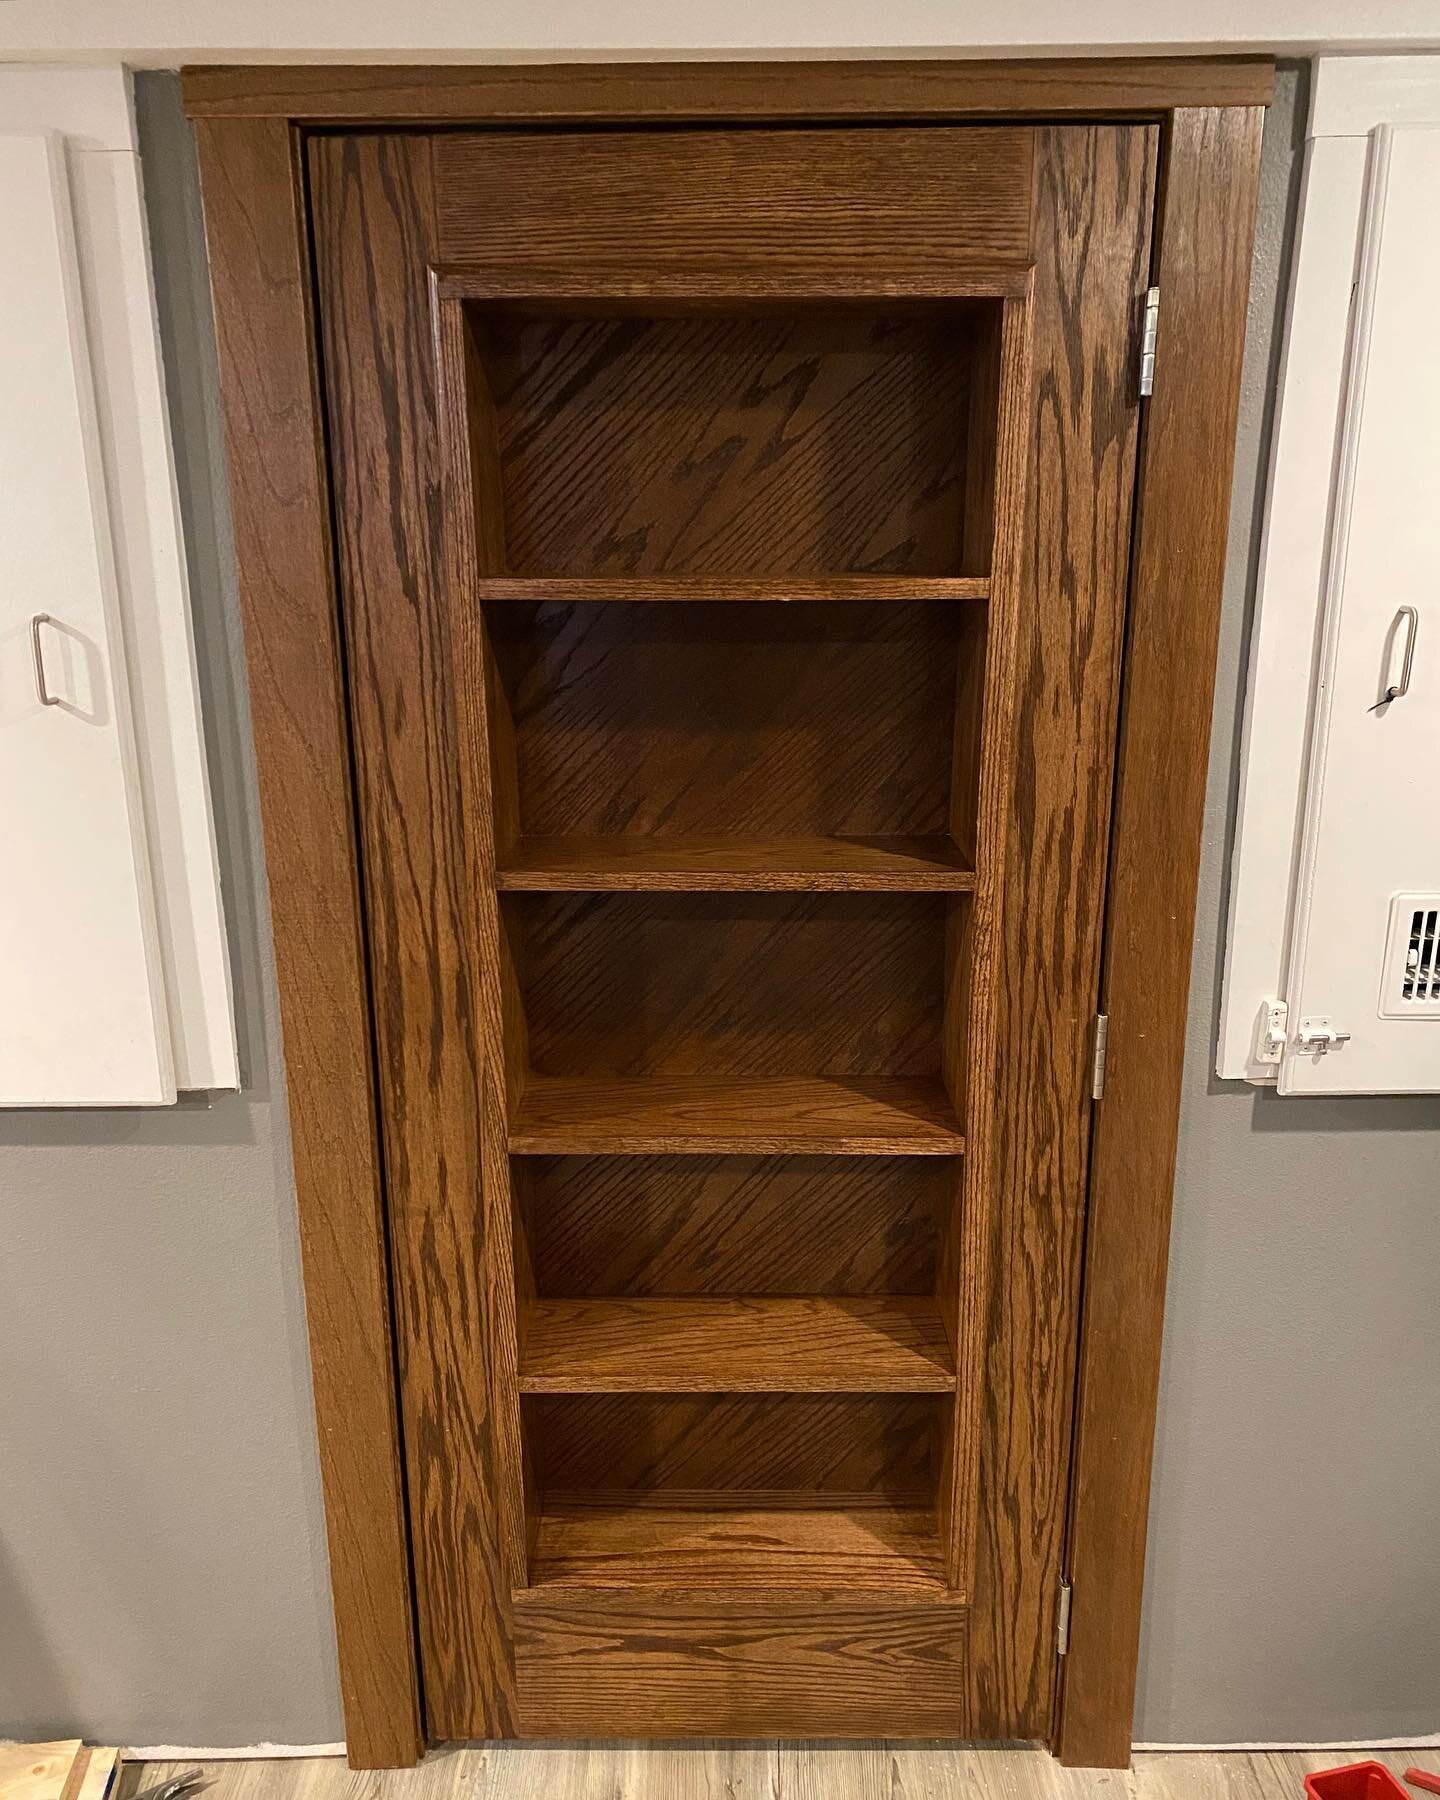 We do custom pieces! Check out this hand made custom bookshelf door. Really looks great with it&rsquo;s rich red oak and a hickory stain!